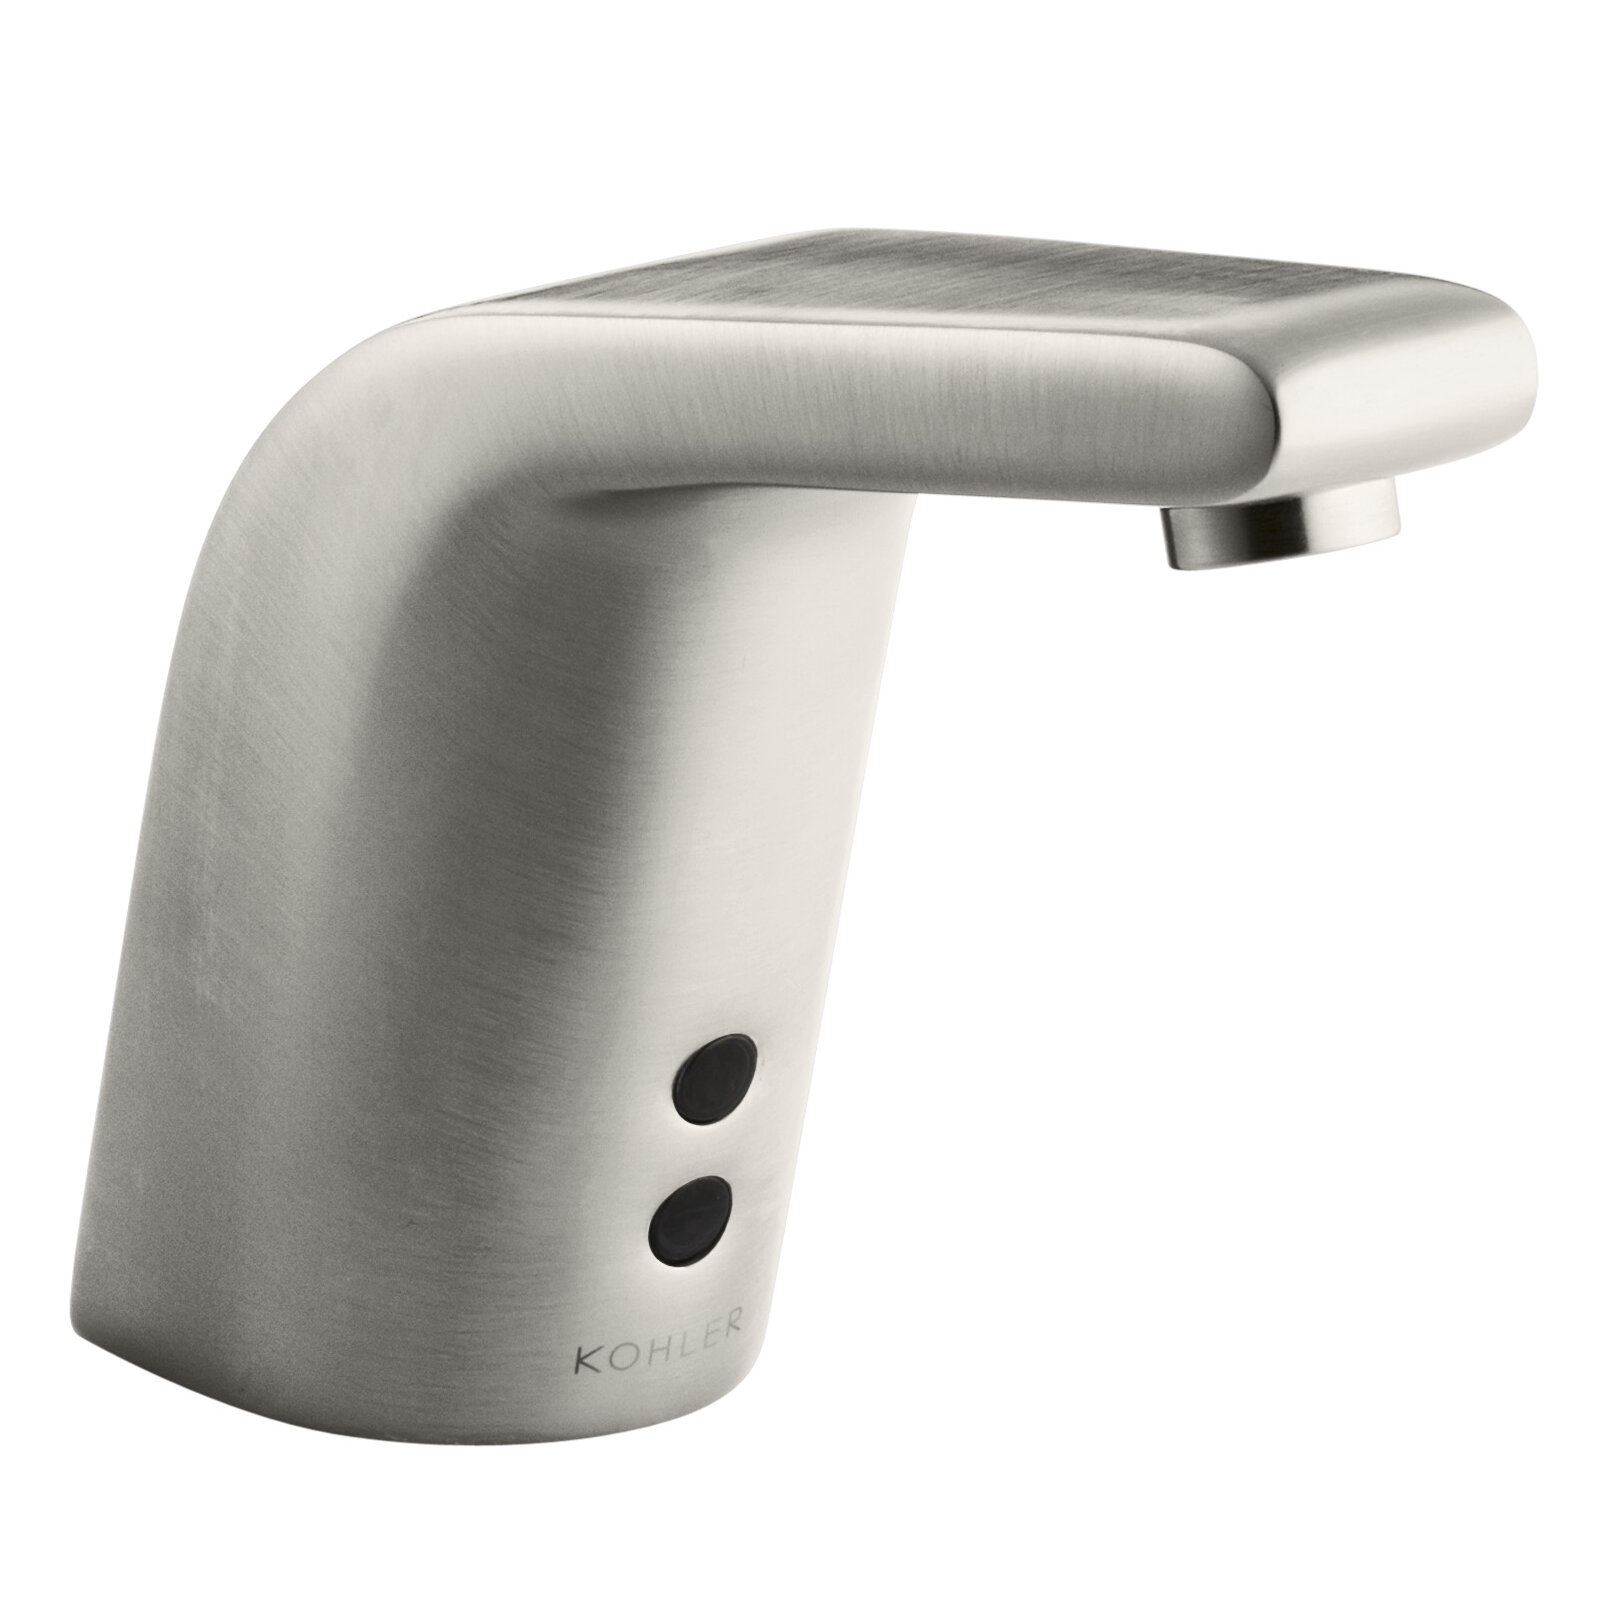 Kohler Sculpted Single-Hole Touchless Ac-Powered Commercial Bathroom Sink  Faucet with Insight Technology and 5-3/4